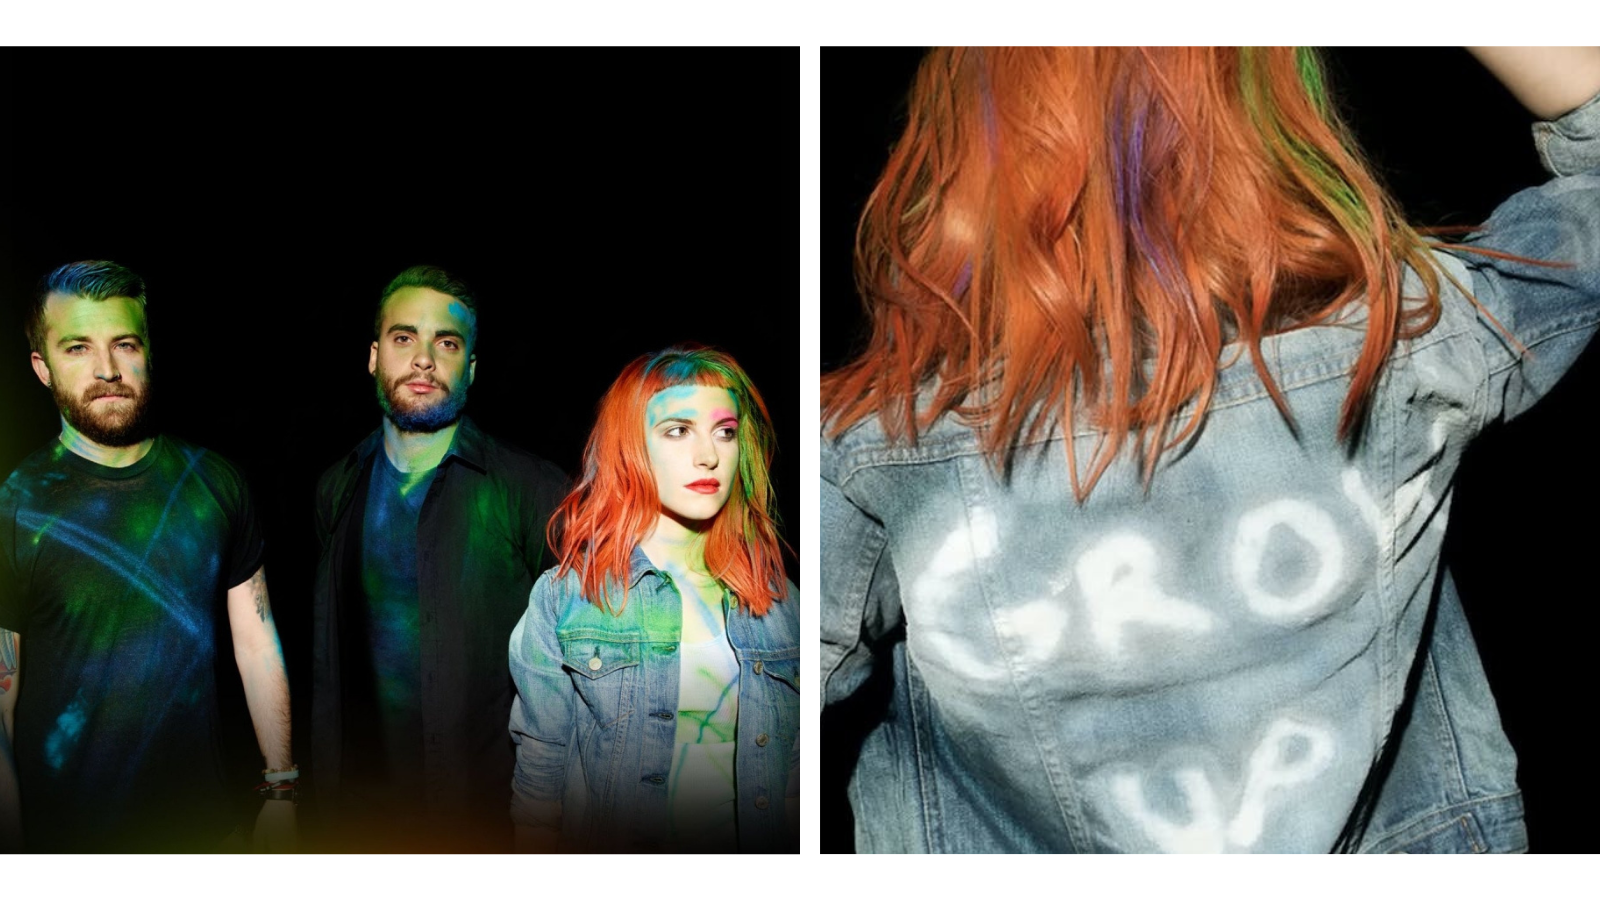 Paramore have changed the artwork of their 2013 self-titled album